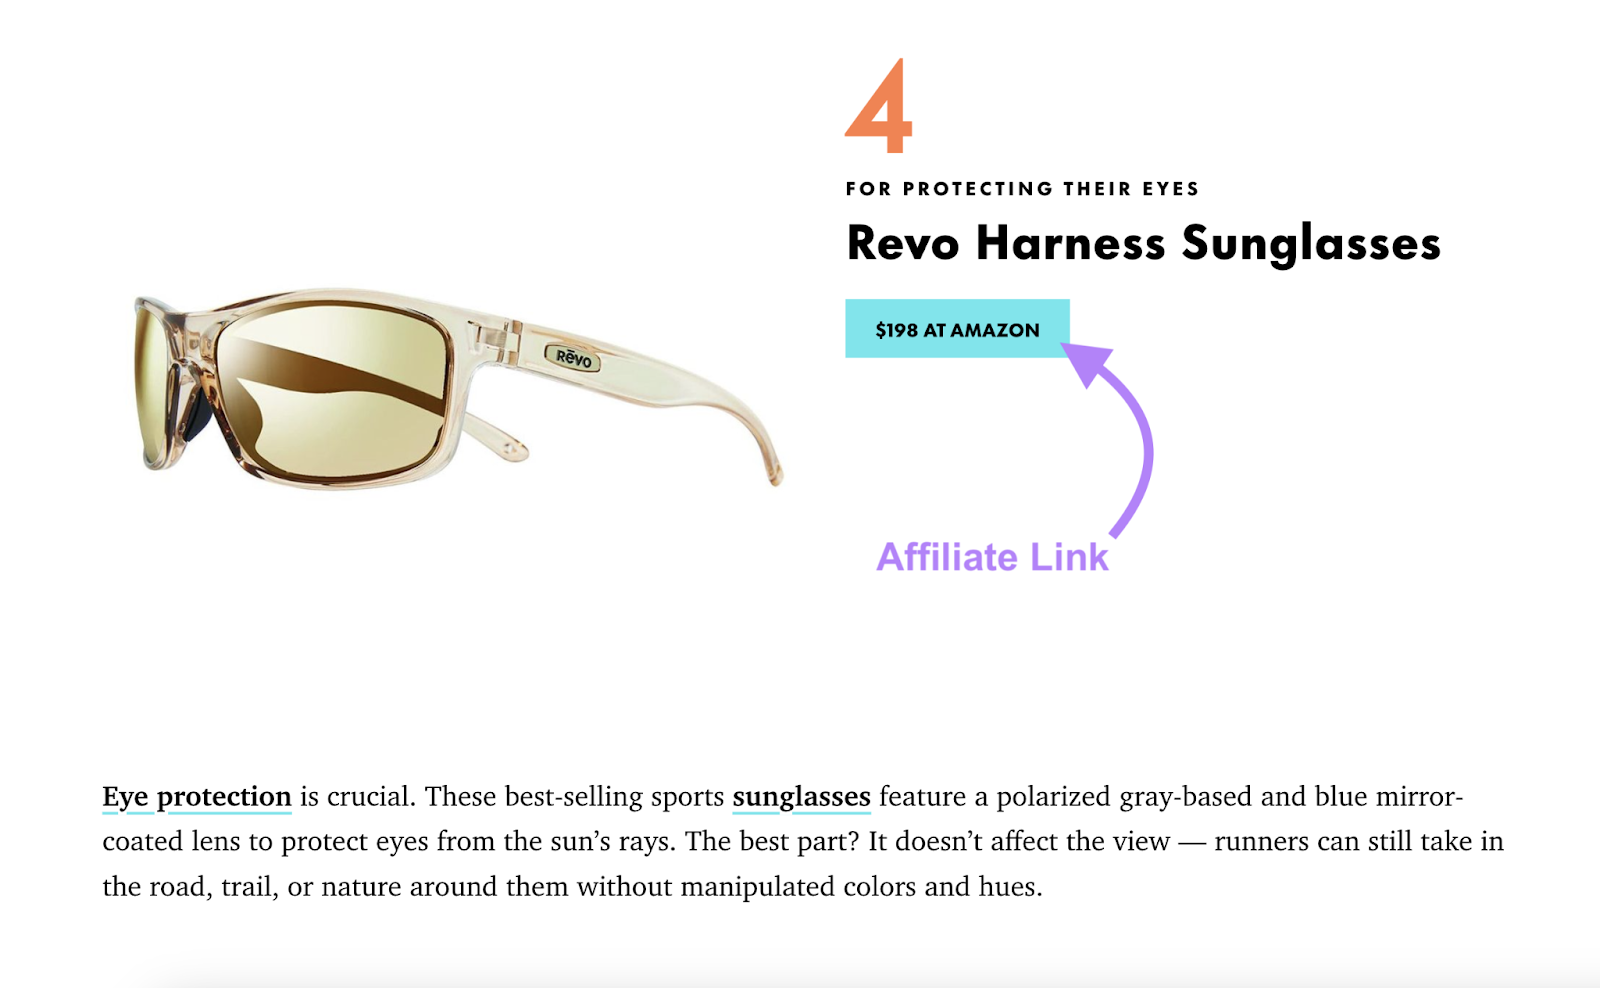 best acquisition  4  is sunglasses and a fastener  to store  connected  amazon. the fastener  is an affiliate link.